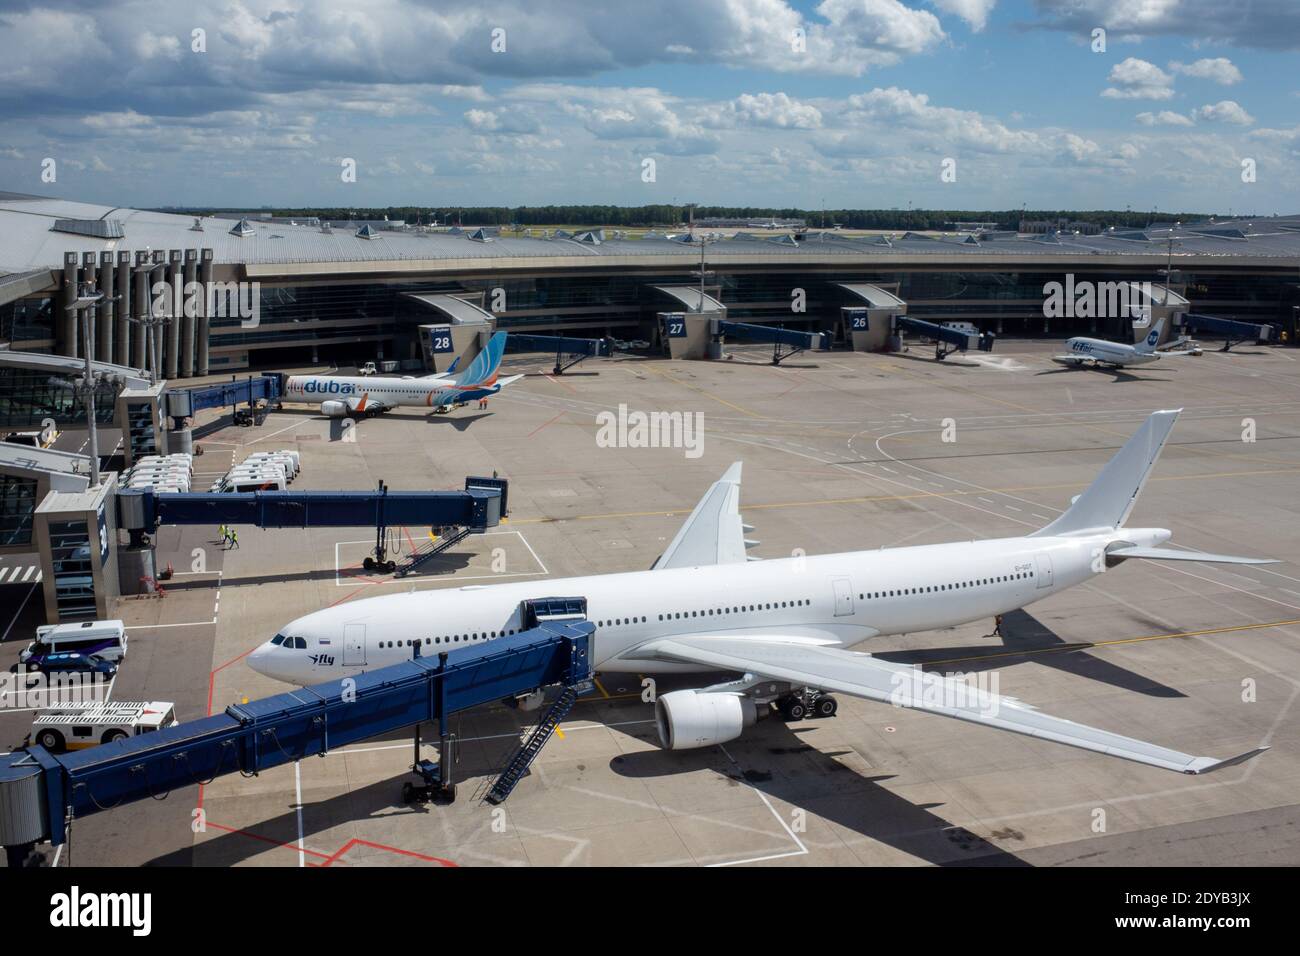 July 2, 2019, Moscow, Russia. Airplane Airbus A330-300 I-Fly airline at Vnukovo airport in Moscow. Stock Photo